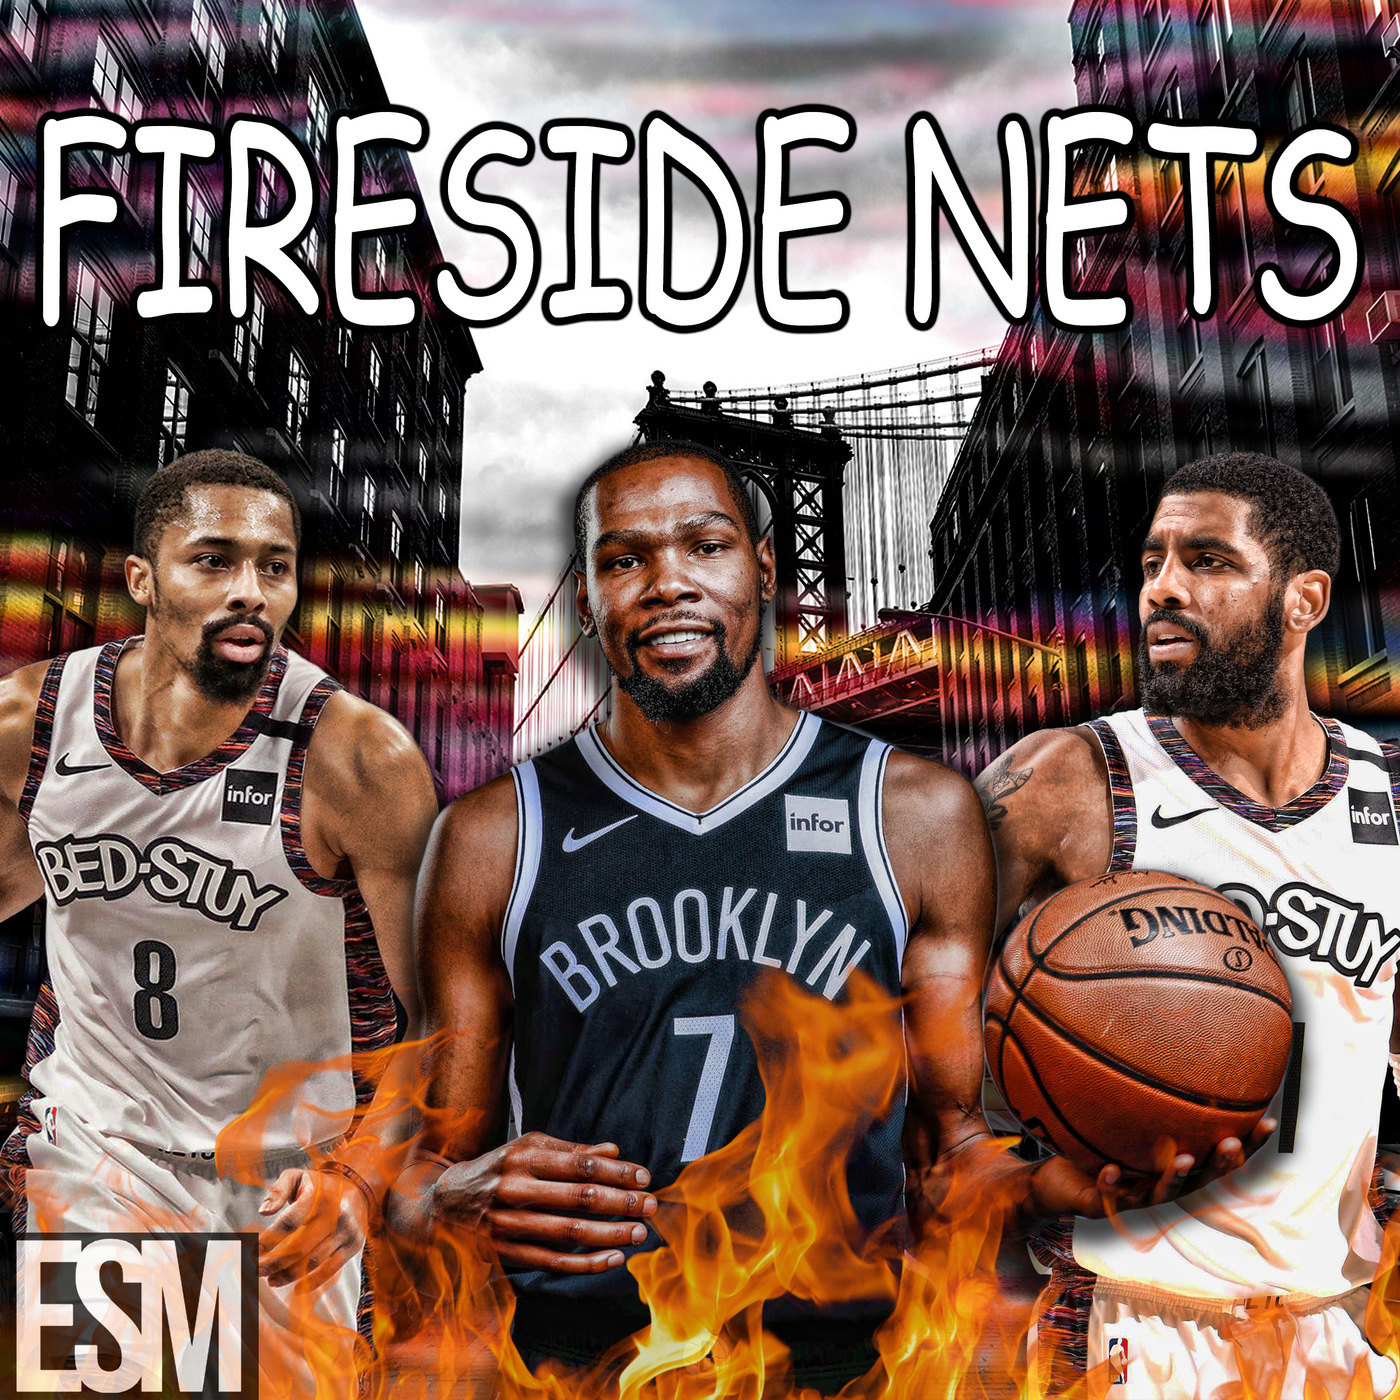 Fireside Nets - Was Spen Wrong for Watching the Oscars?